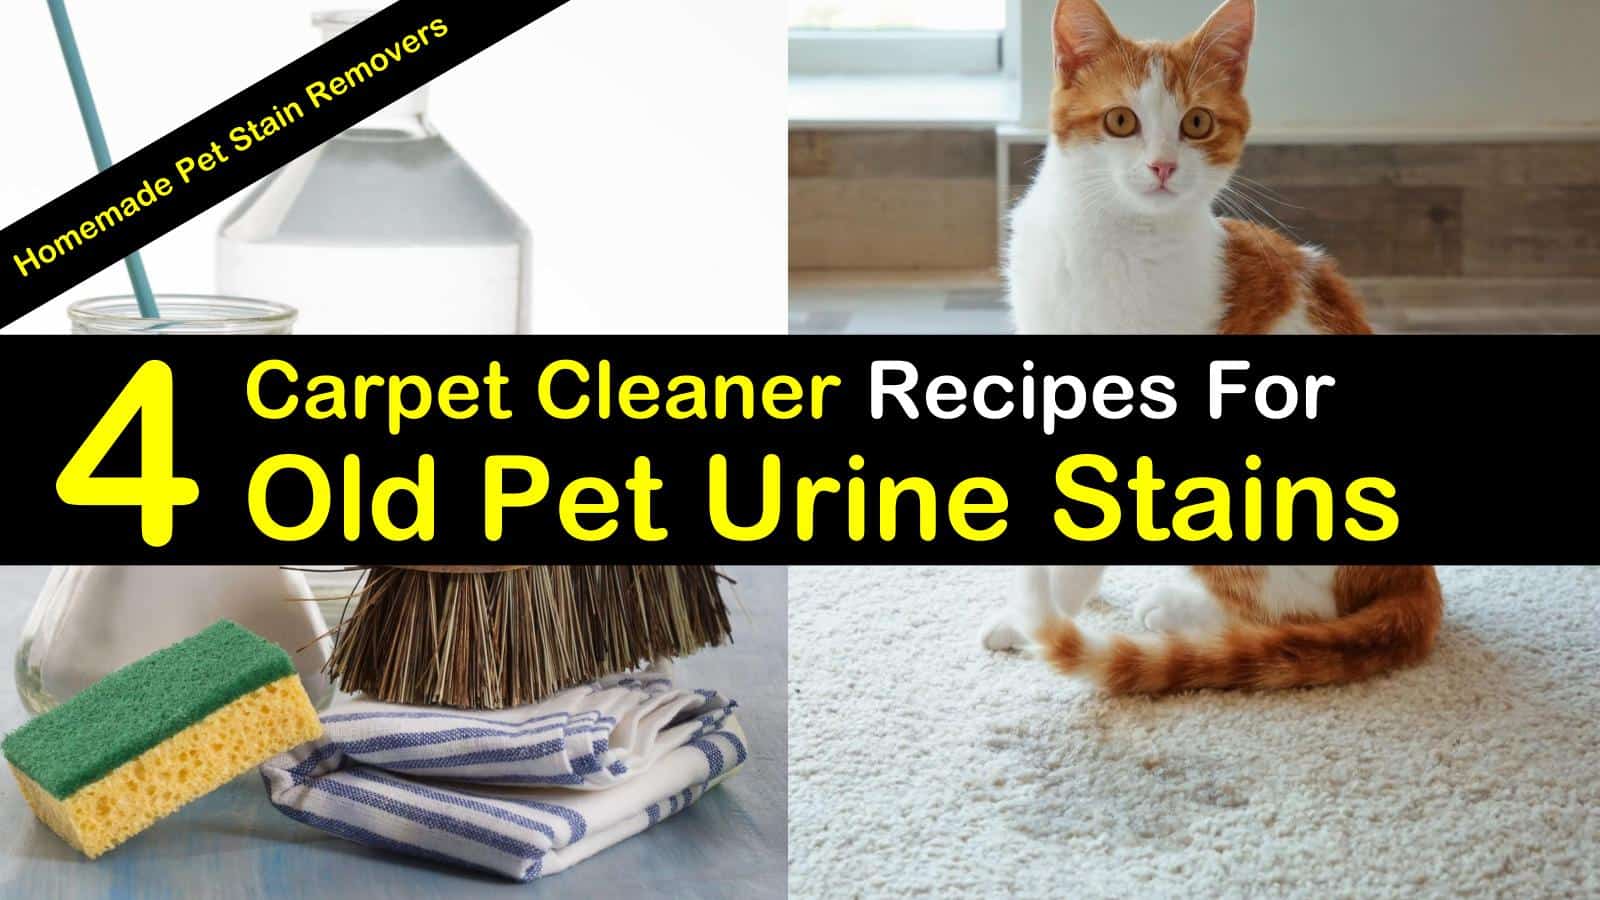 4 Best Carpet Cleaner Recipes For Old Pet Urine Stains